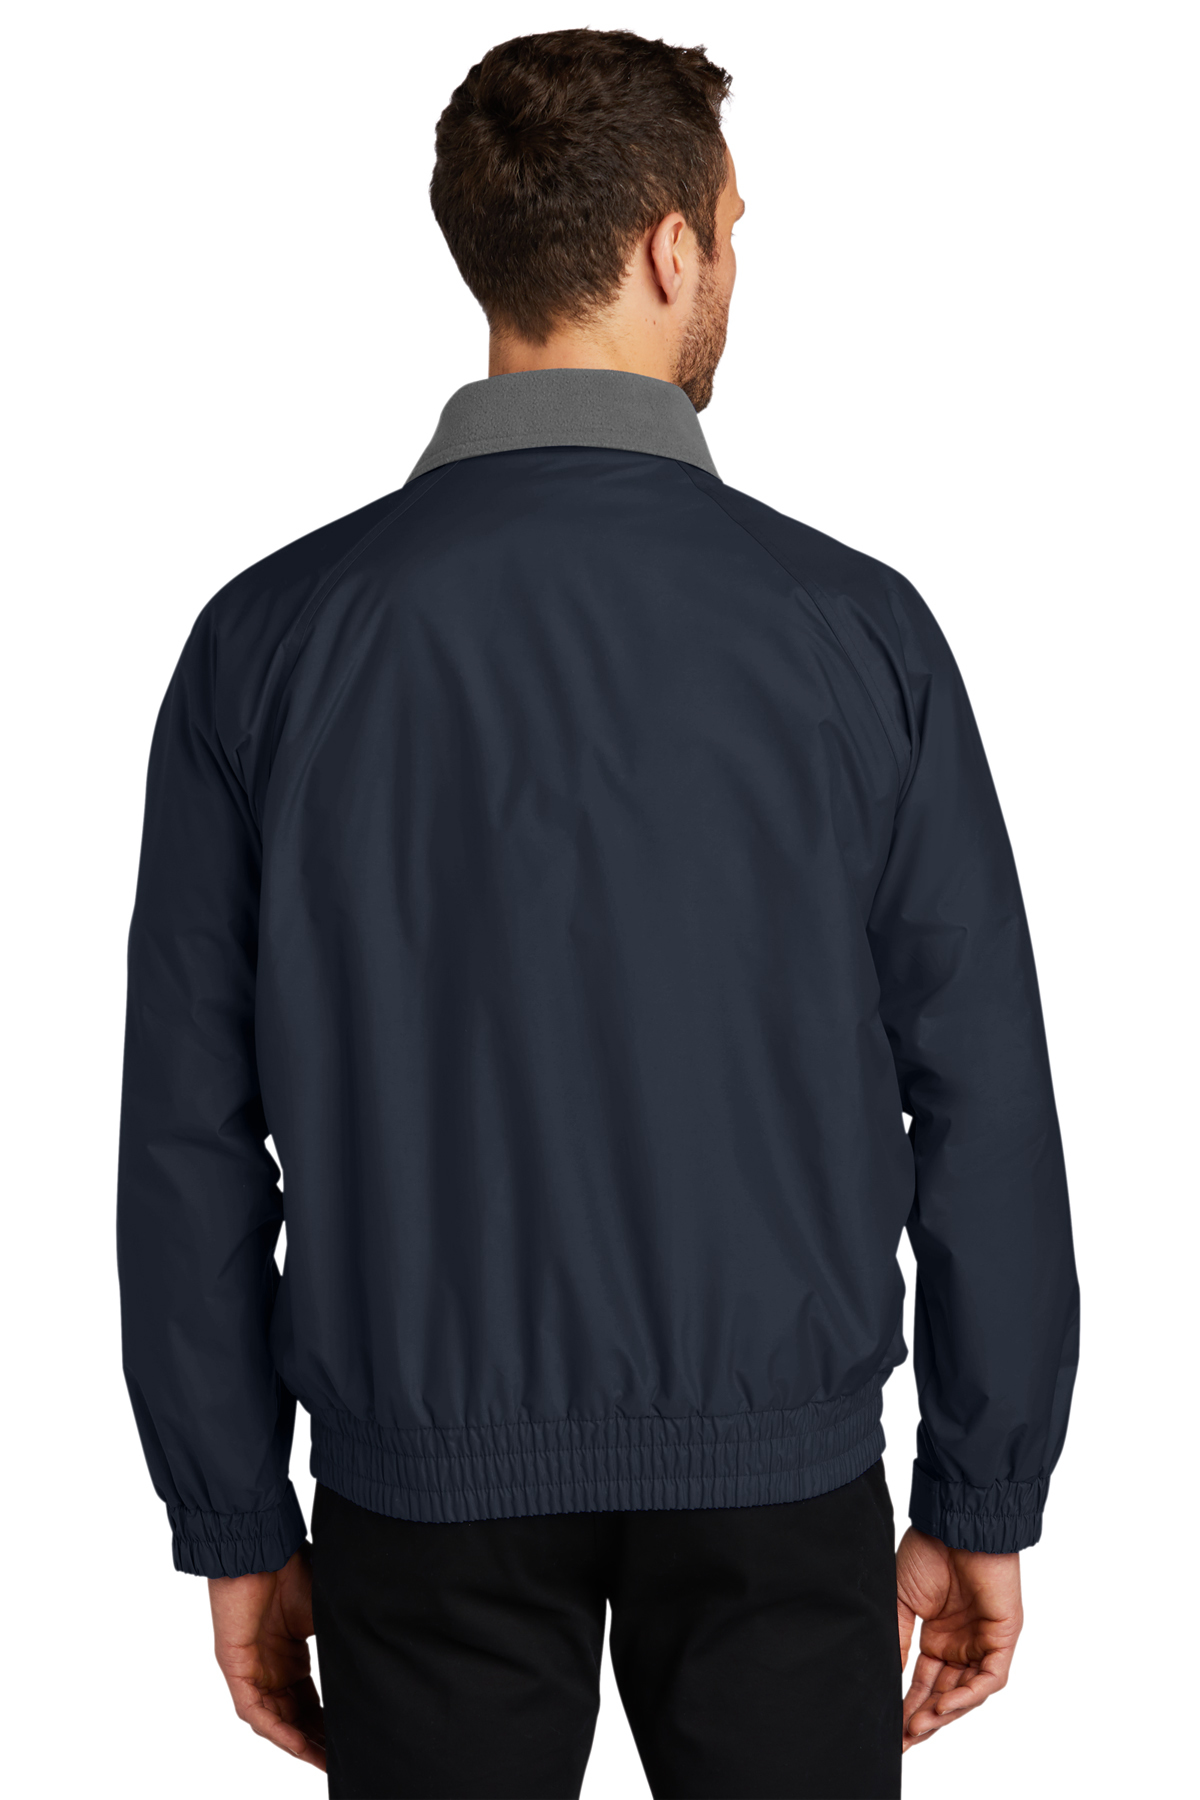 Port Authority Competitor™ Jacket | Product | Company Casuals